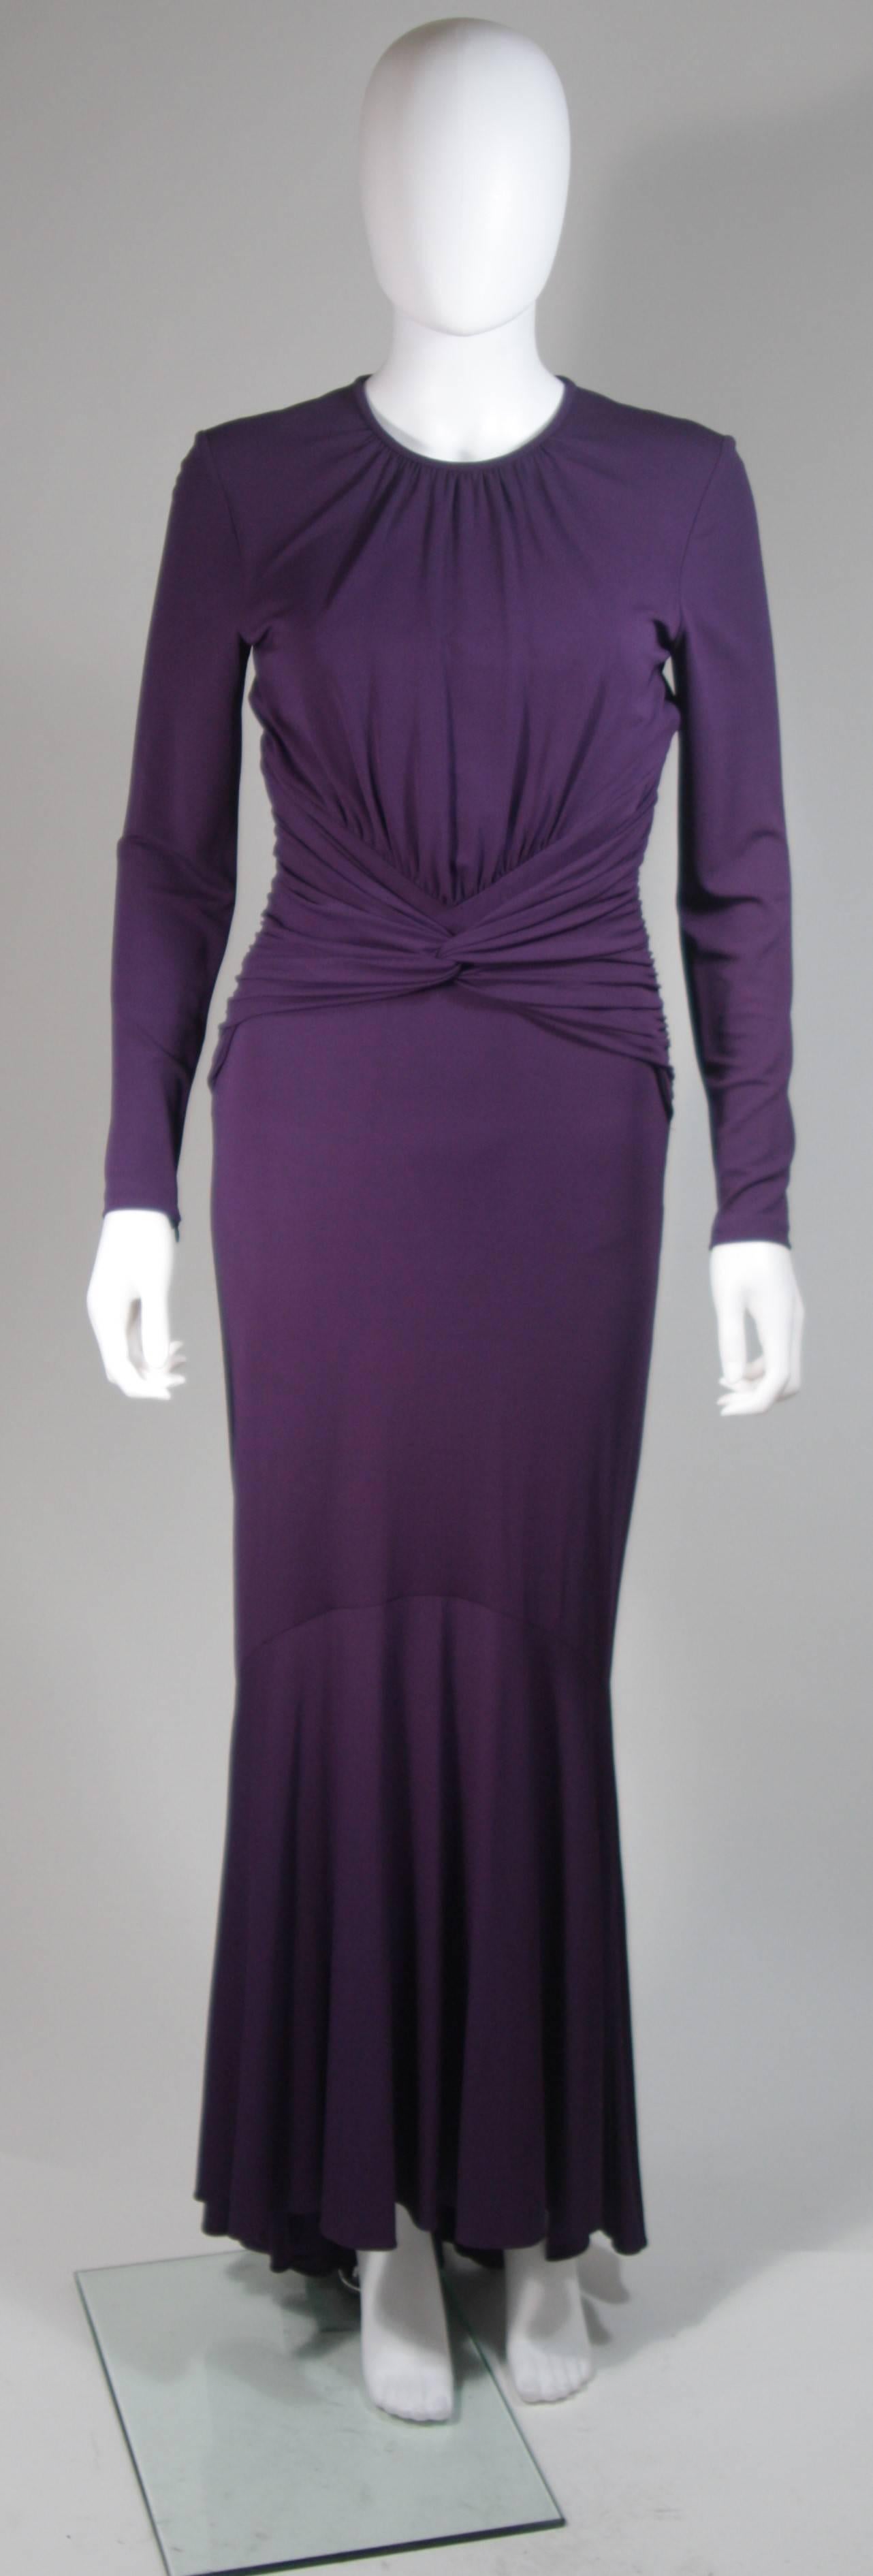 This Michael Kors gown is composed of a radiant soft stretch purple jersey. The classic long sleeve style is modernized with an exquisite open back. There is a top button closure at the center back. In excellent condition. 

  **Please